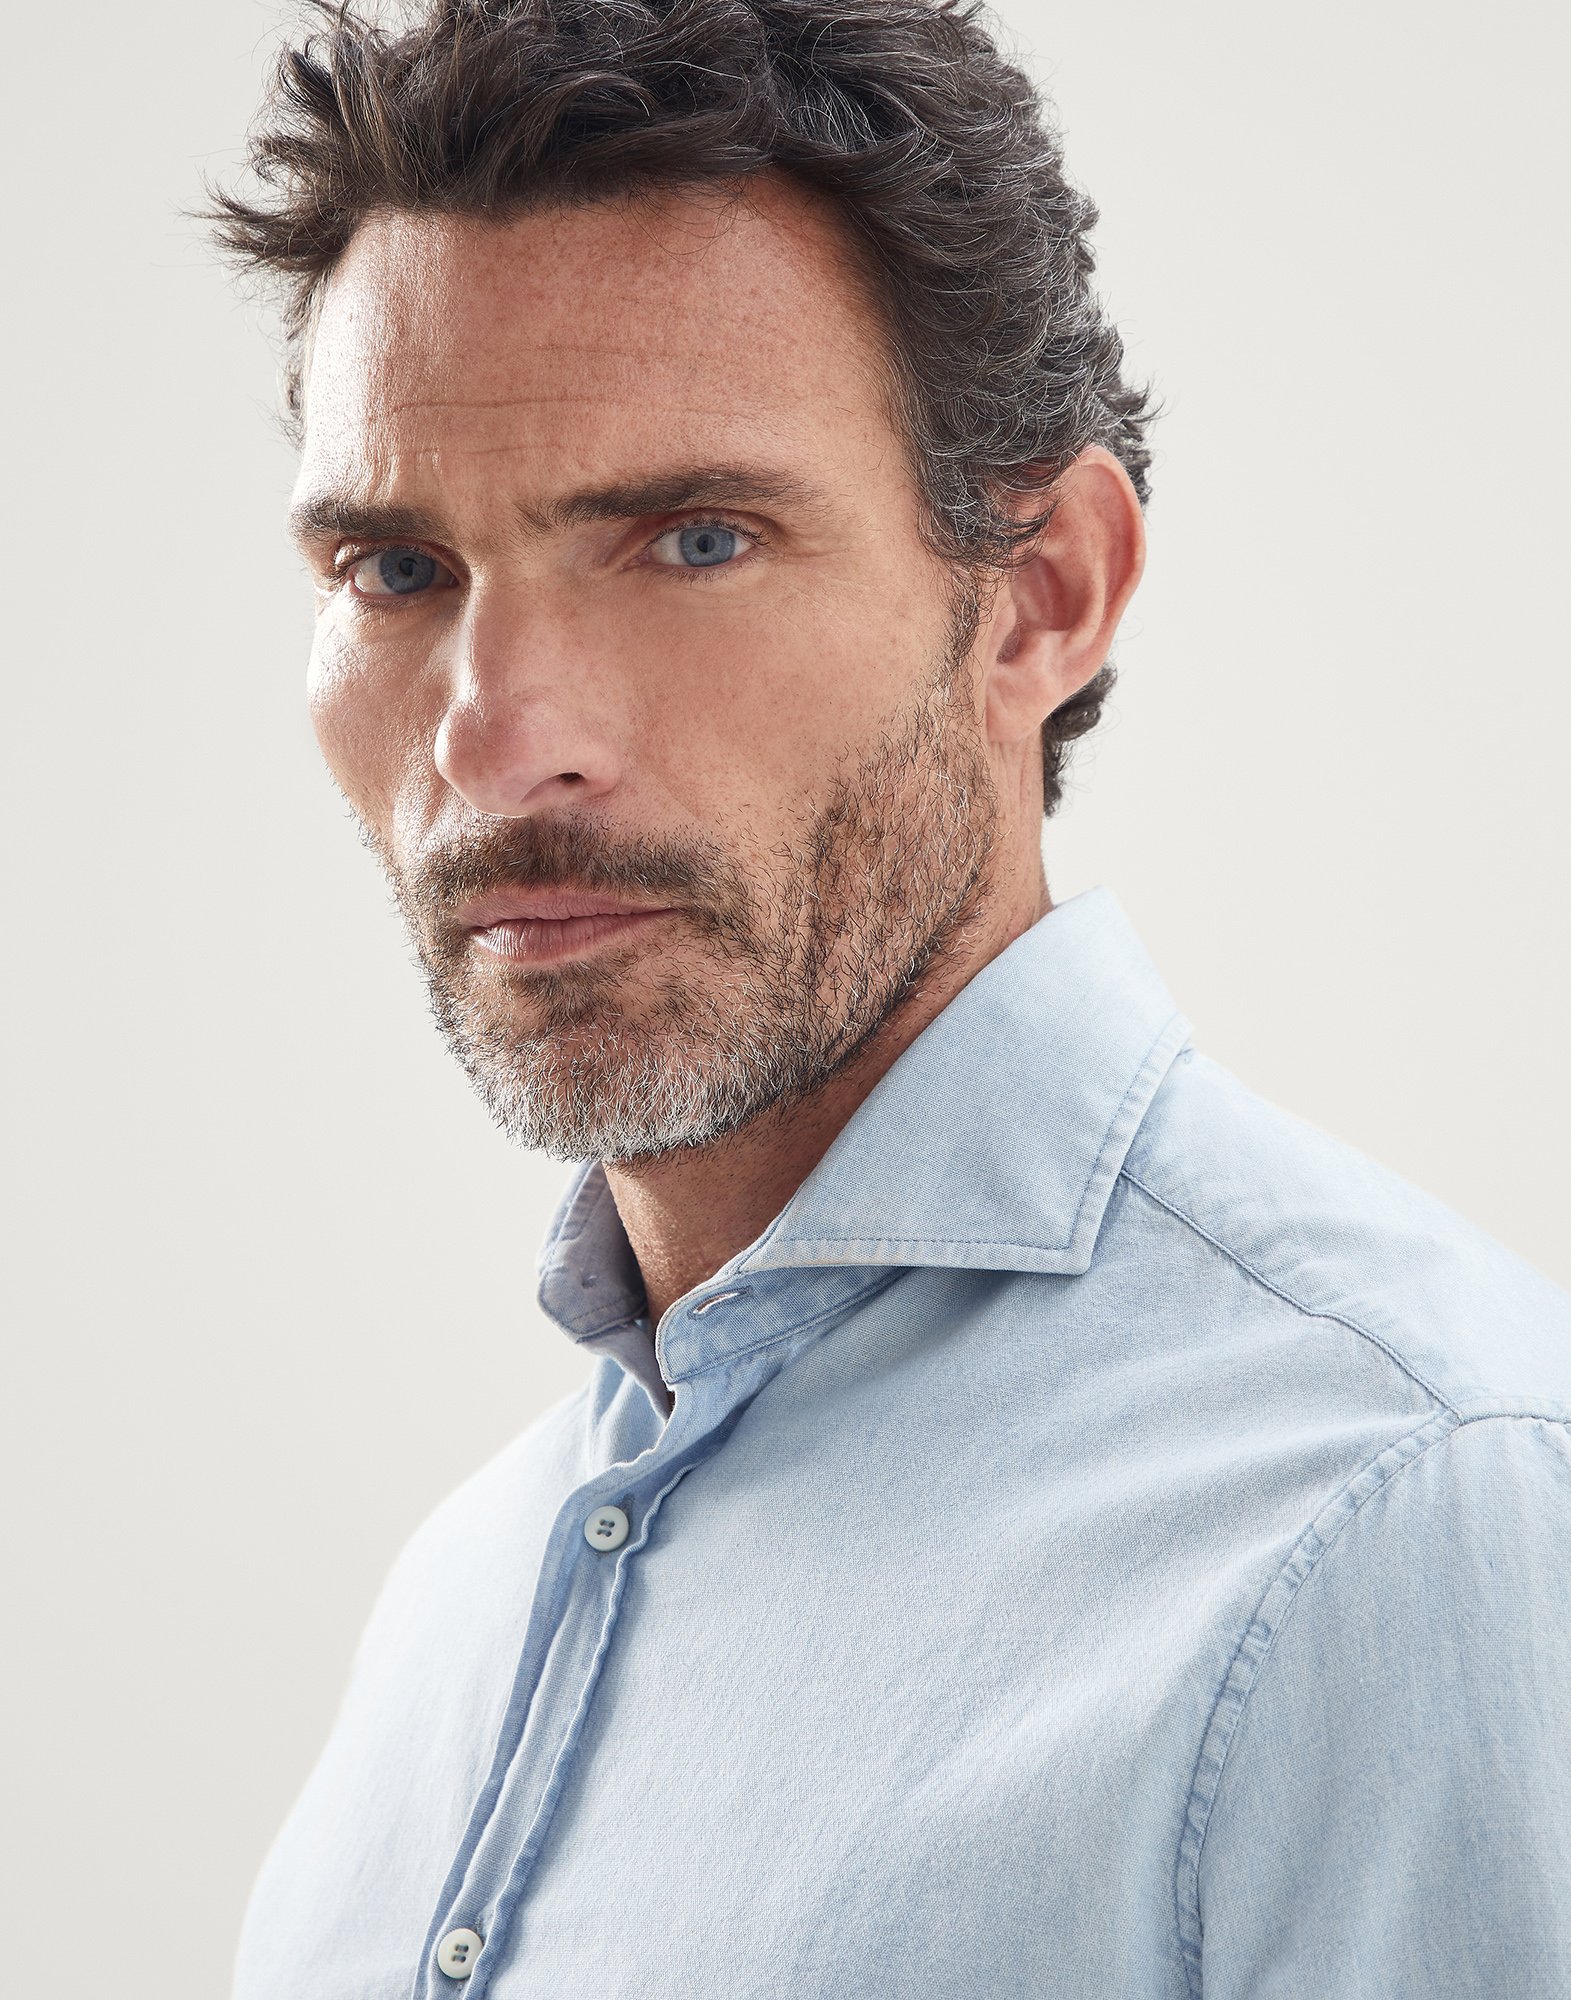 Men's casual and dress shirts | Brunello Cucinelli